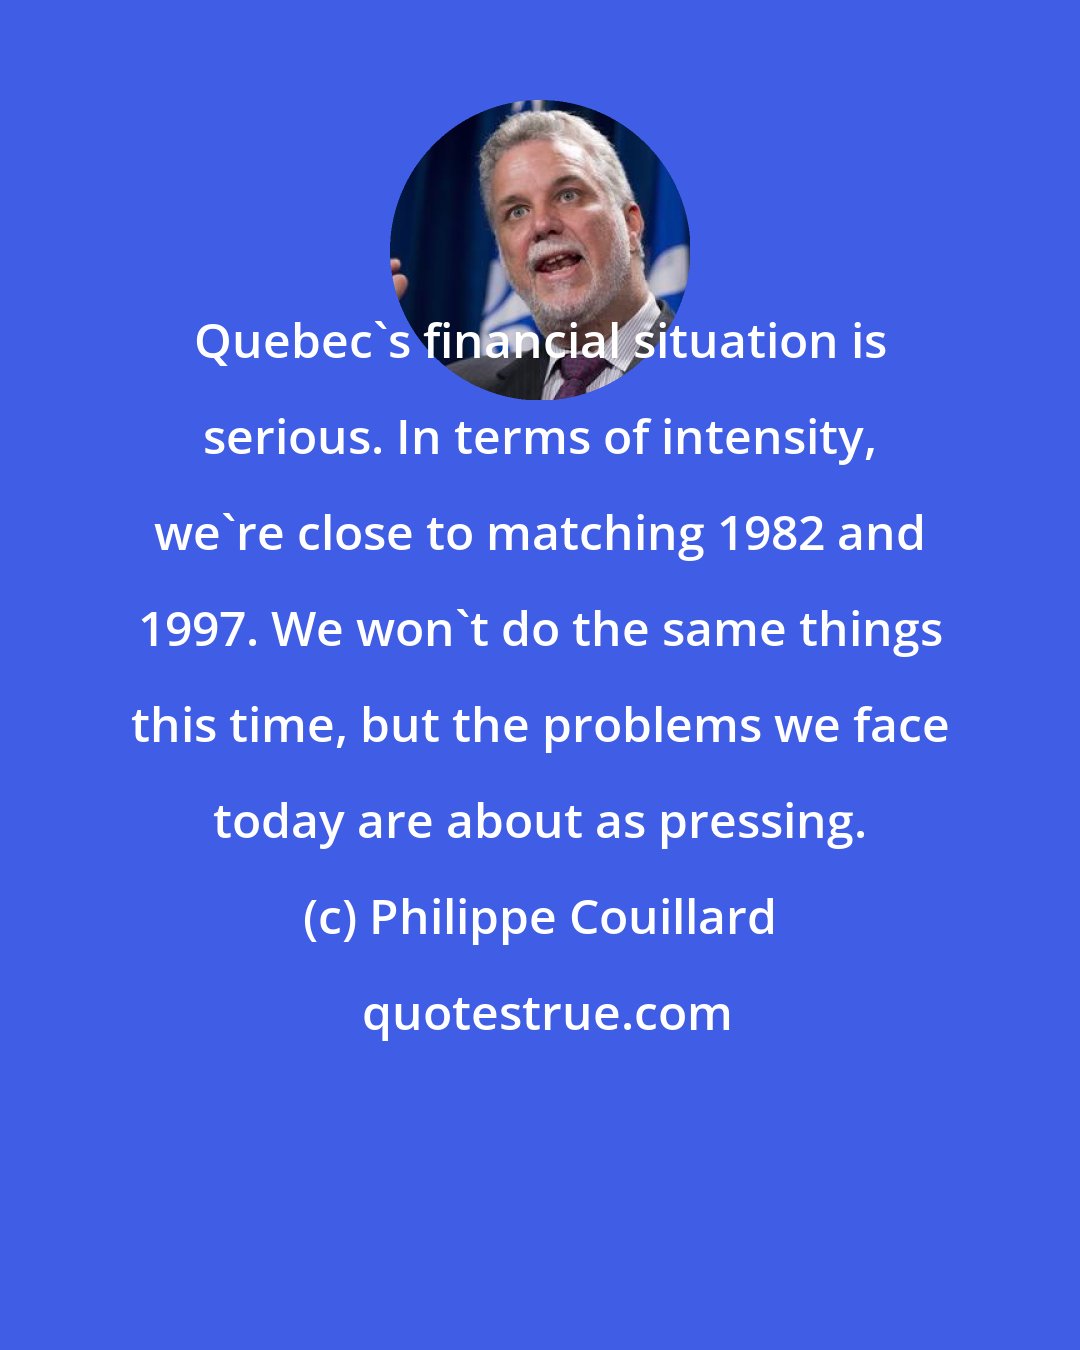 Philippe Couillard: Quebec's financial situation is serious. In terms of intensity, we're close to matching 1982 and 1997. We won't do the same things this time, but the problems we face today are about as pressing.